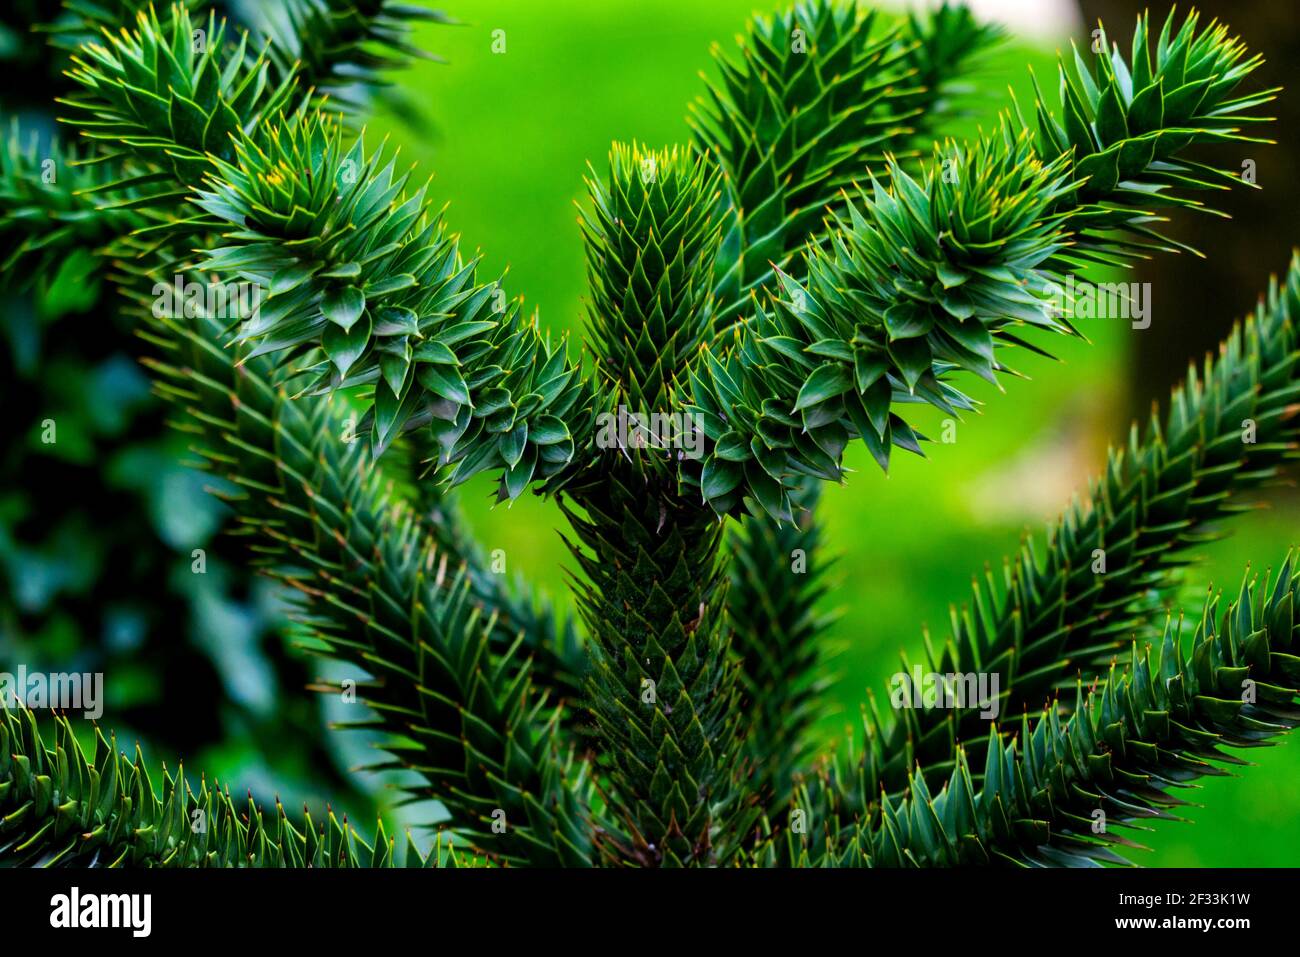 Branch of Araucaria araucana, Monkey puzzle tree, Monkey tail tree, or Chilean pine. It is an evergreen tree, the hardiest species in the conifer genu Stock Photo